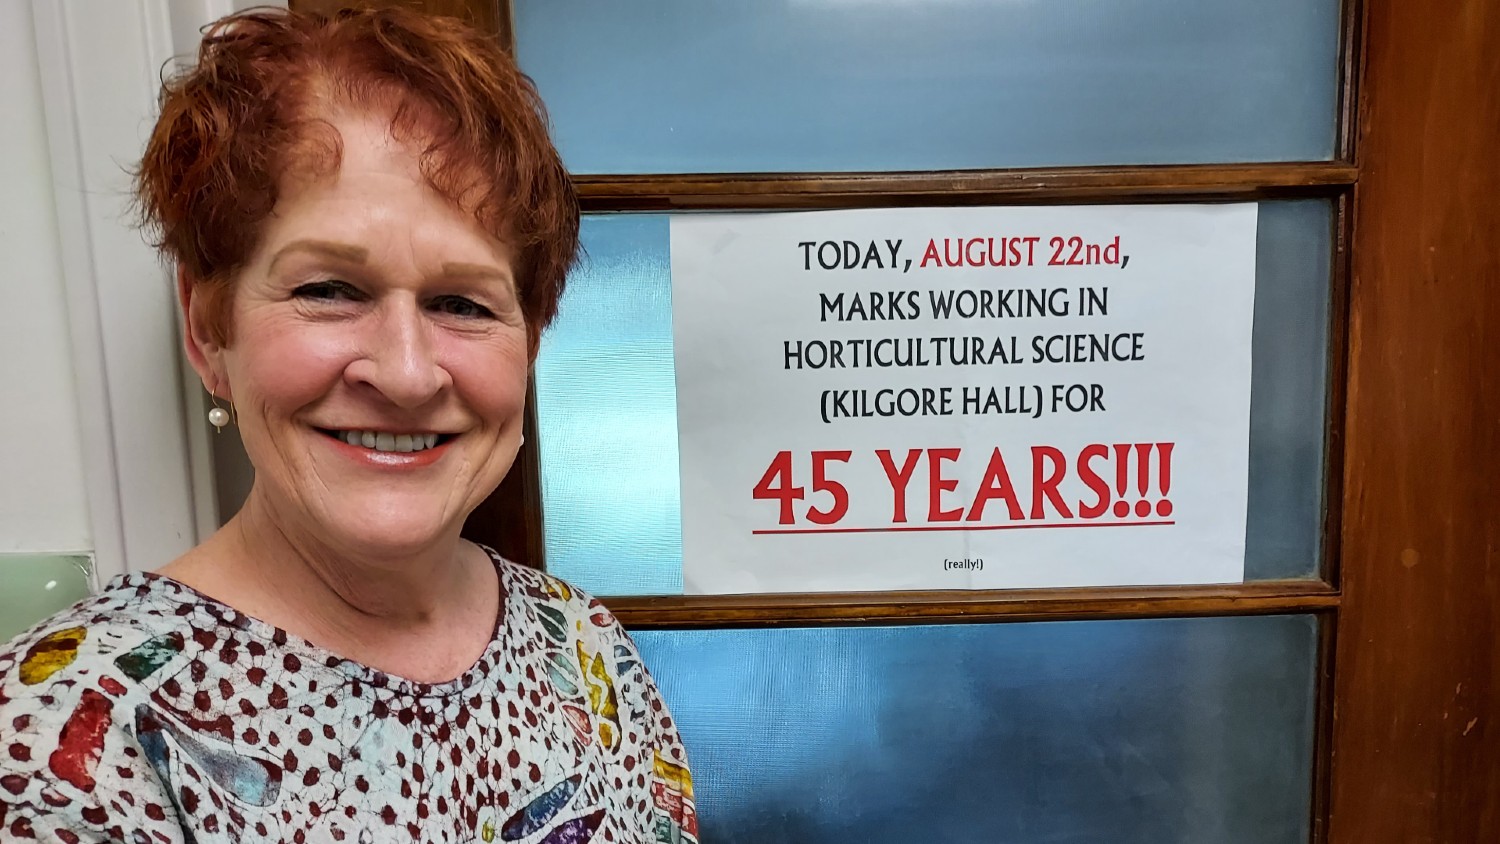 In August 2022, Rachel McLaughlin celebrated 45 years of service at NC State.